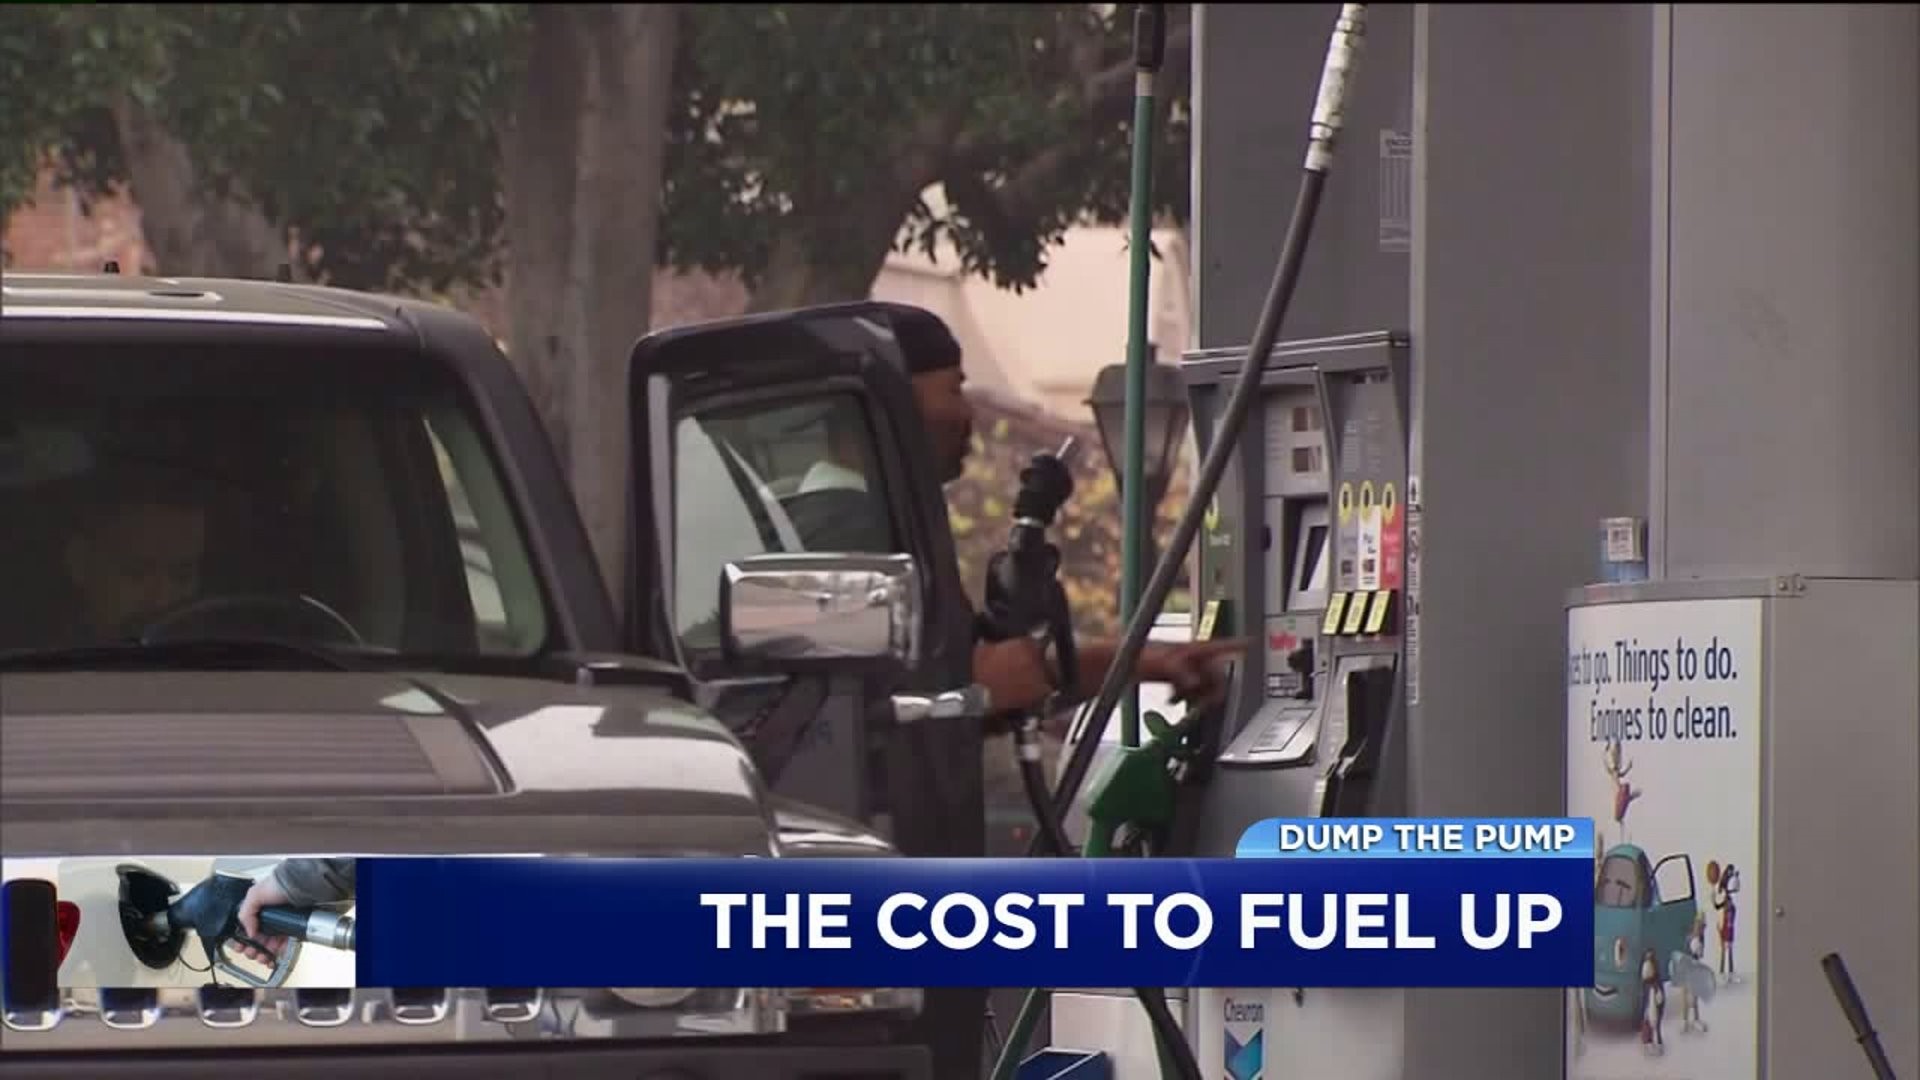 Dump the Pump: The Cost to Fuel Up